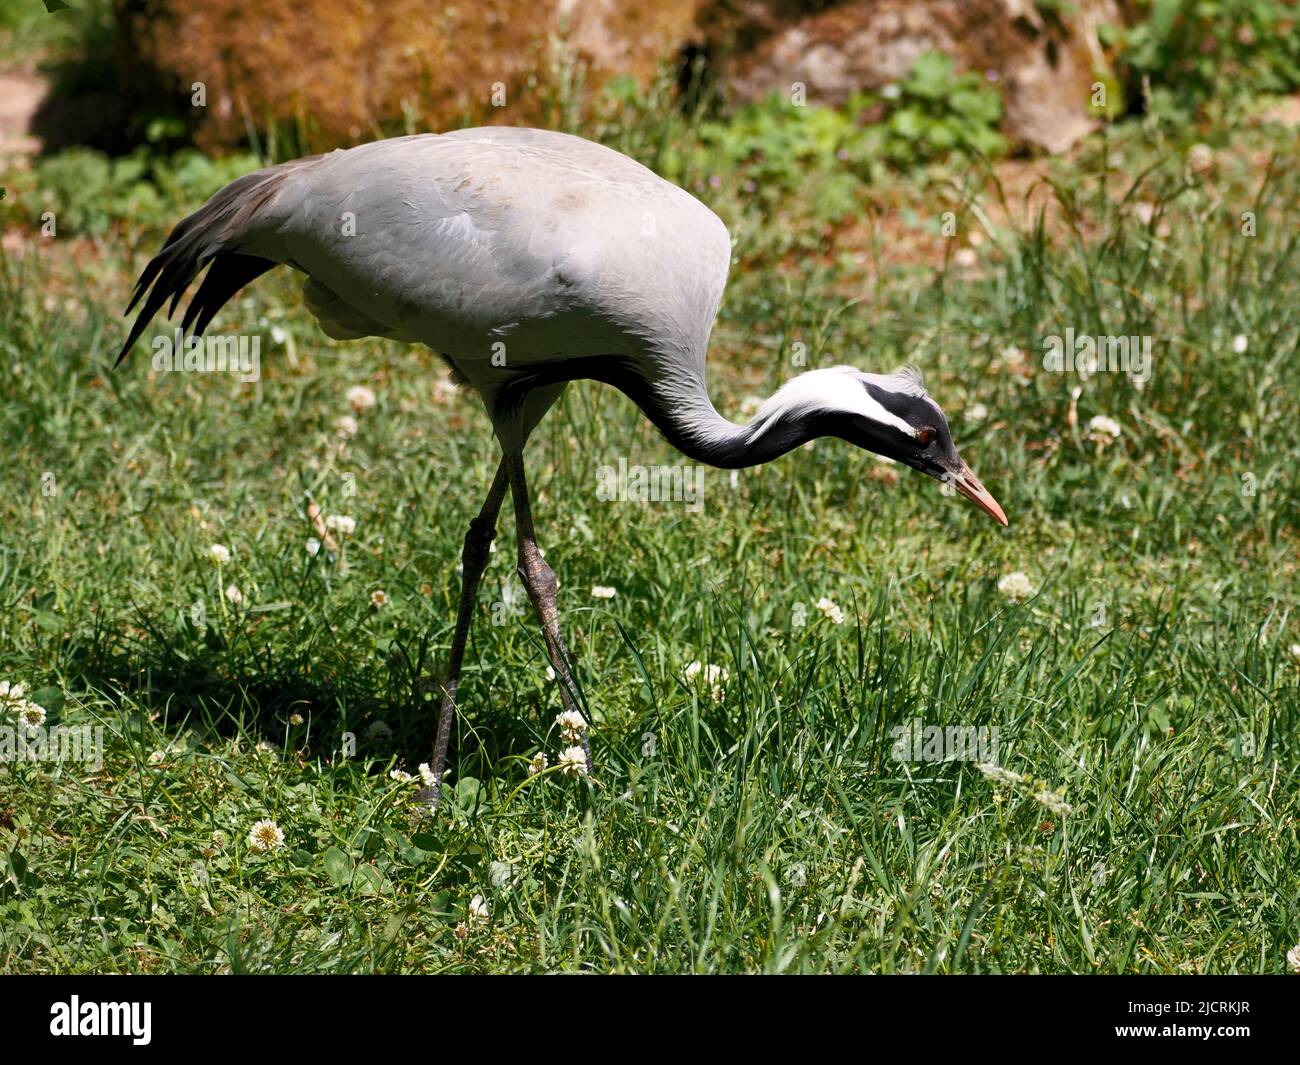 The demoiselle crane (Anthropoides virgo) seen from profile and walking on grass Stock Photo